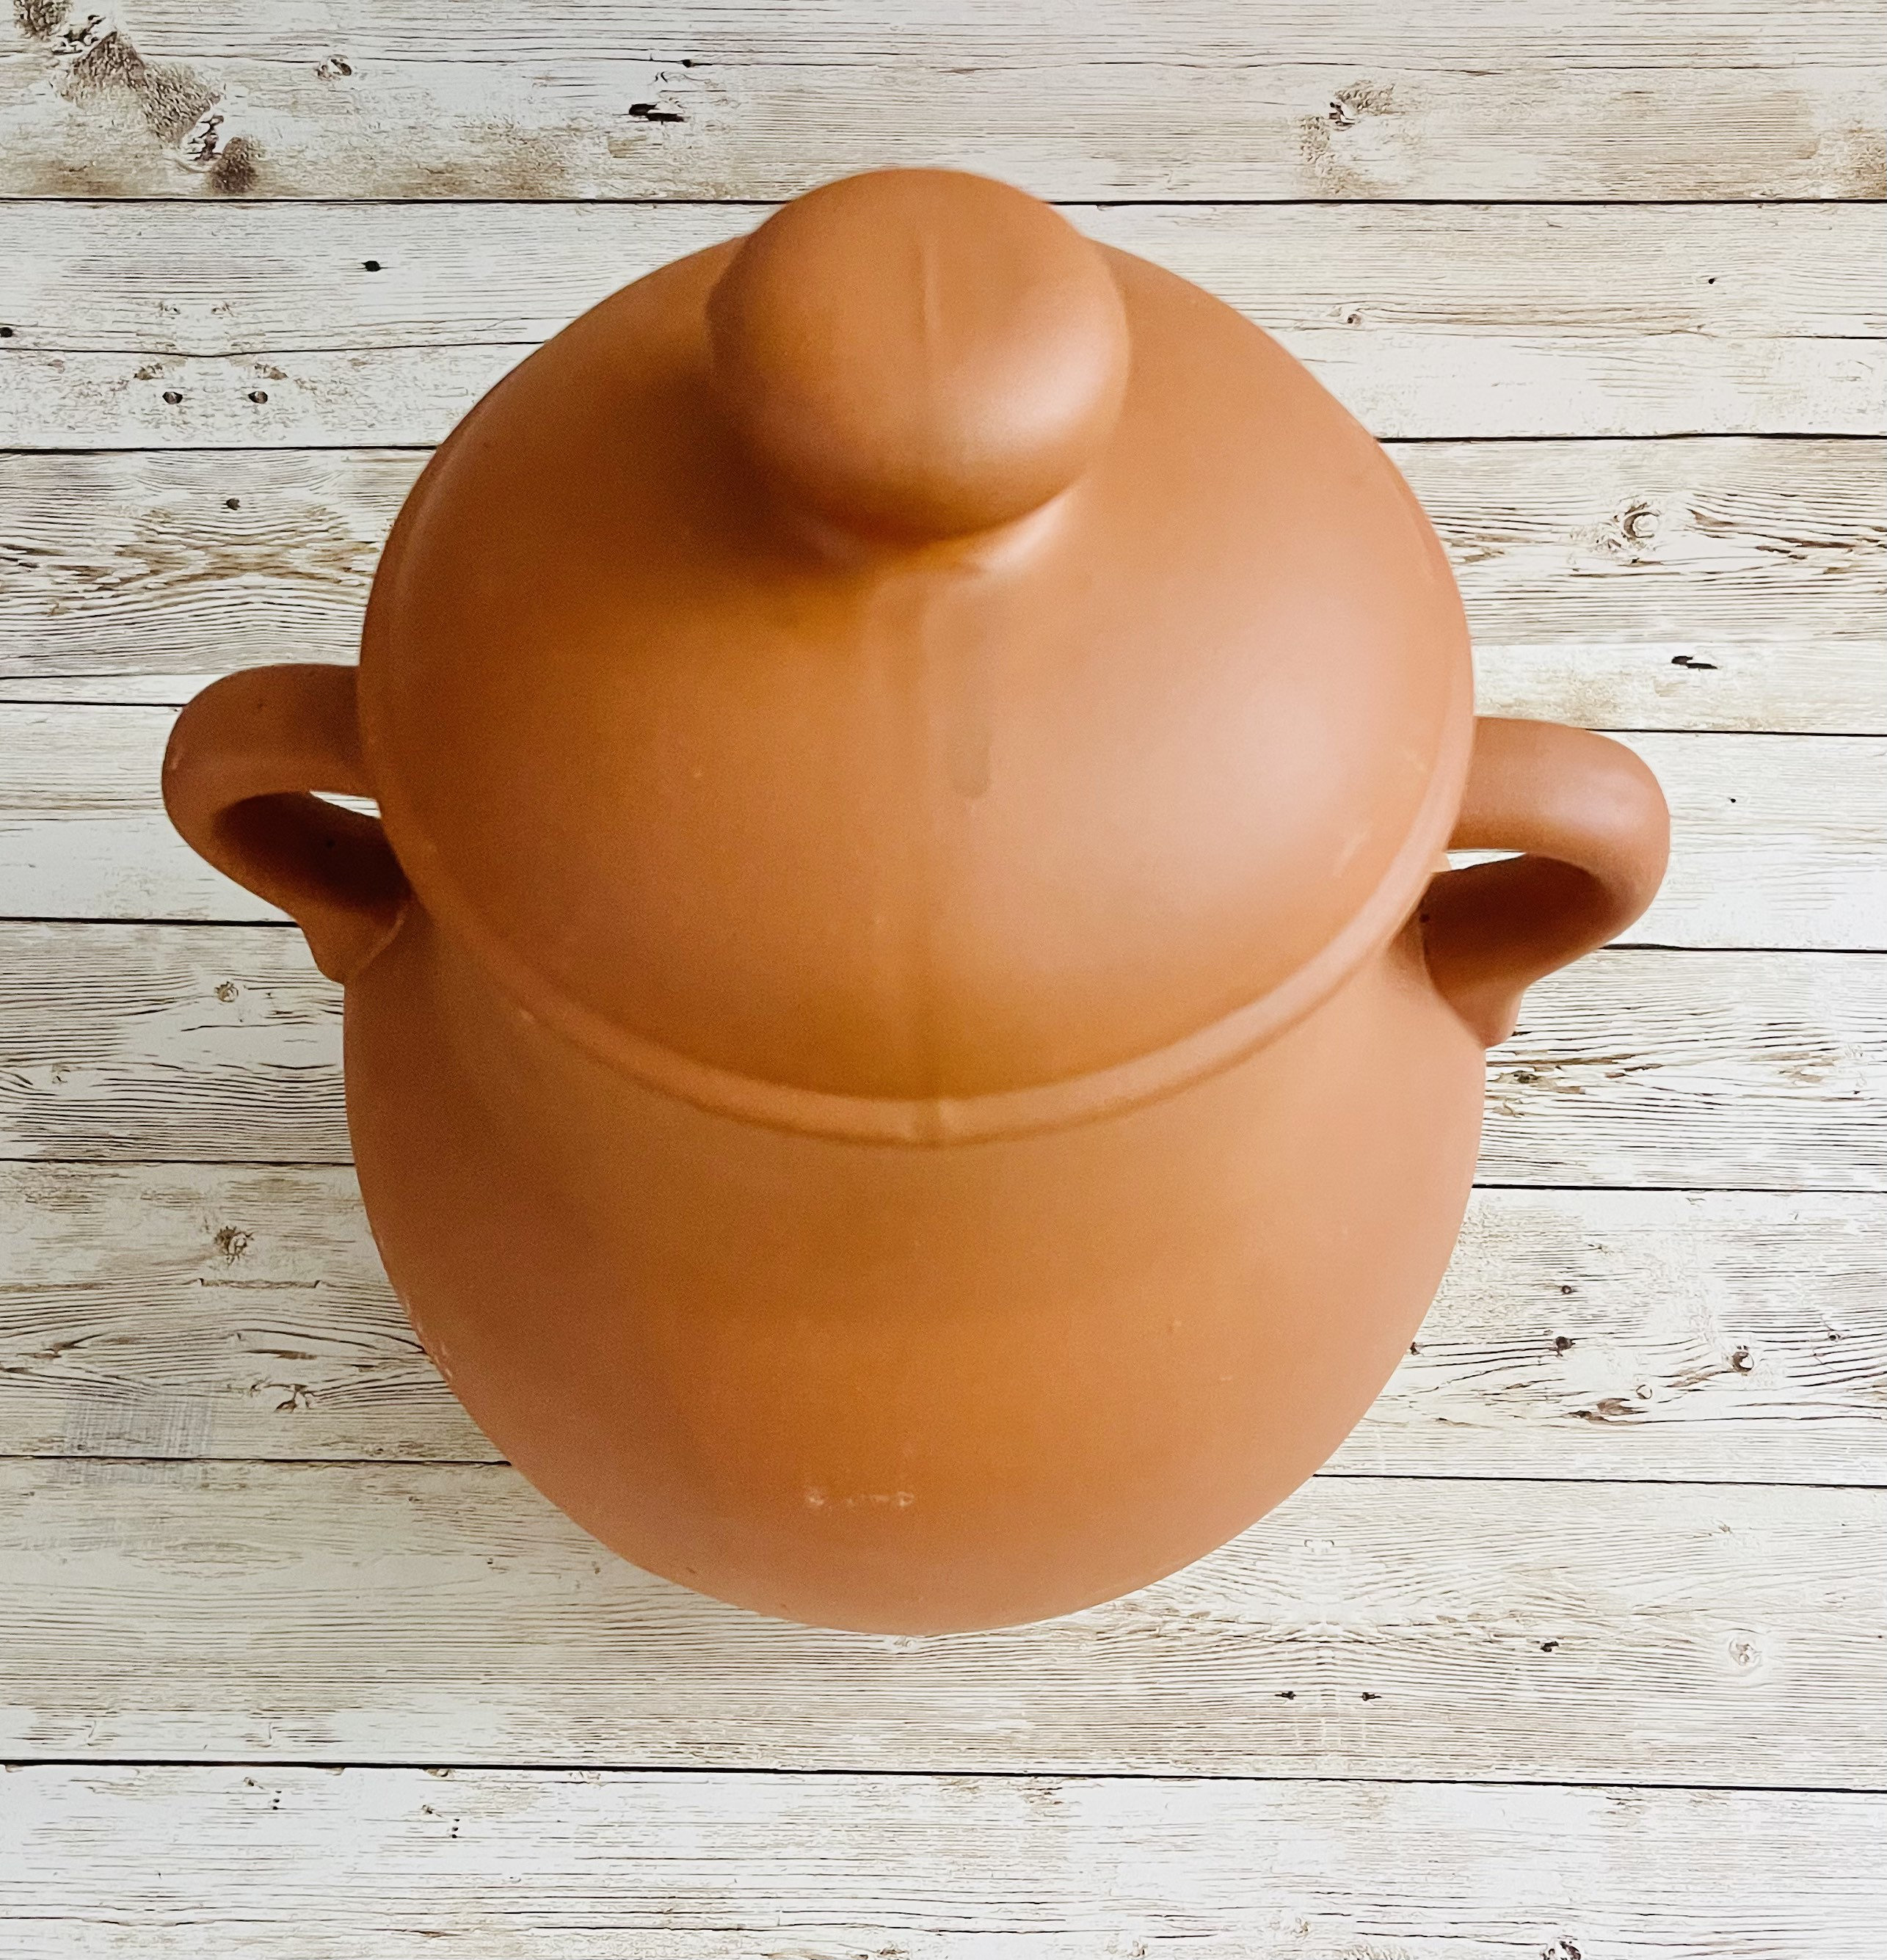 Buy Olla Frijolera De Barro 1.5 Qt. Mini Traditional Handmade Mexican  Authentic Artisan Barro Clay 100% Stockpot with Brown Glaze Interior Finish  Online at Low Prices in India 